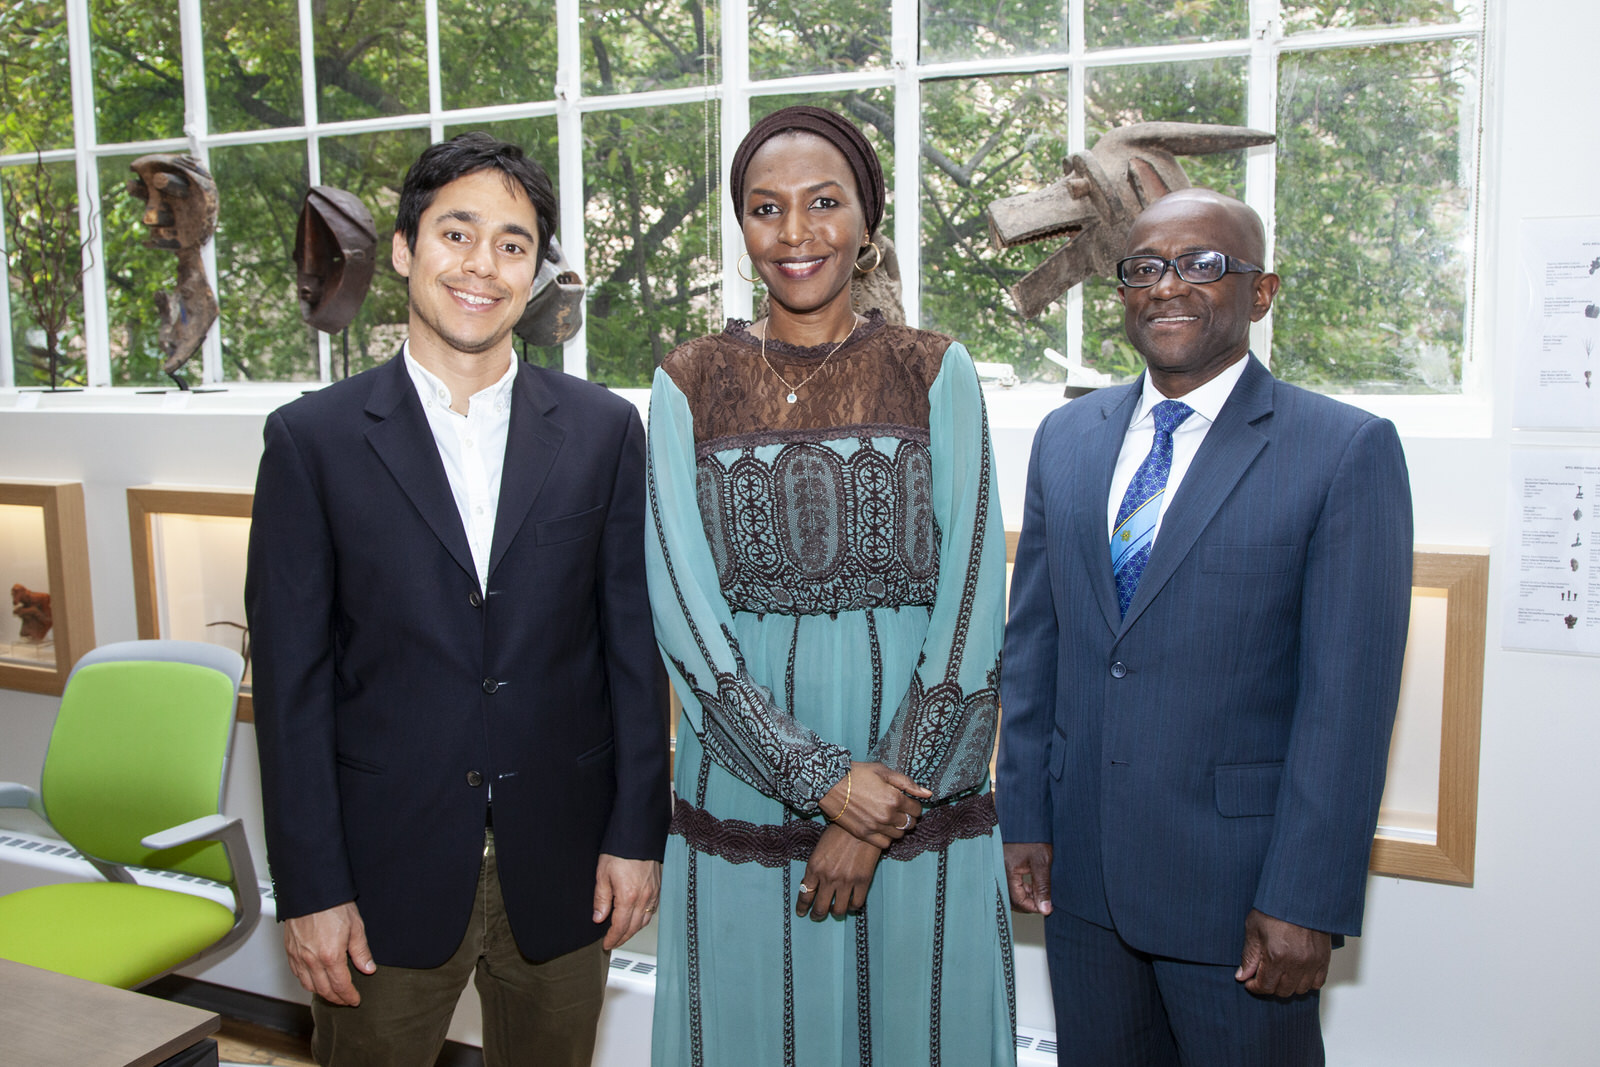 Copy of Africa House Fireside Chat with H.E. Ambassador Fatima Kyari Mohammed, African Union Permanent Observer to the United Nations